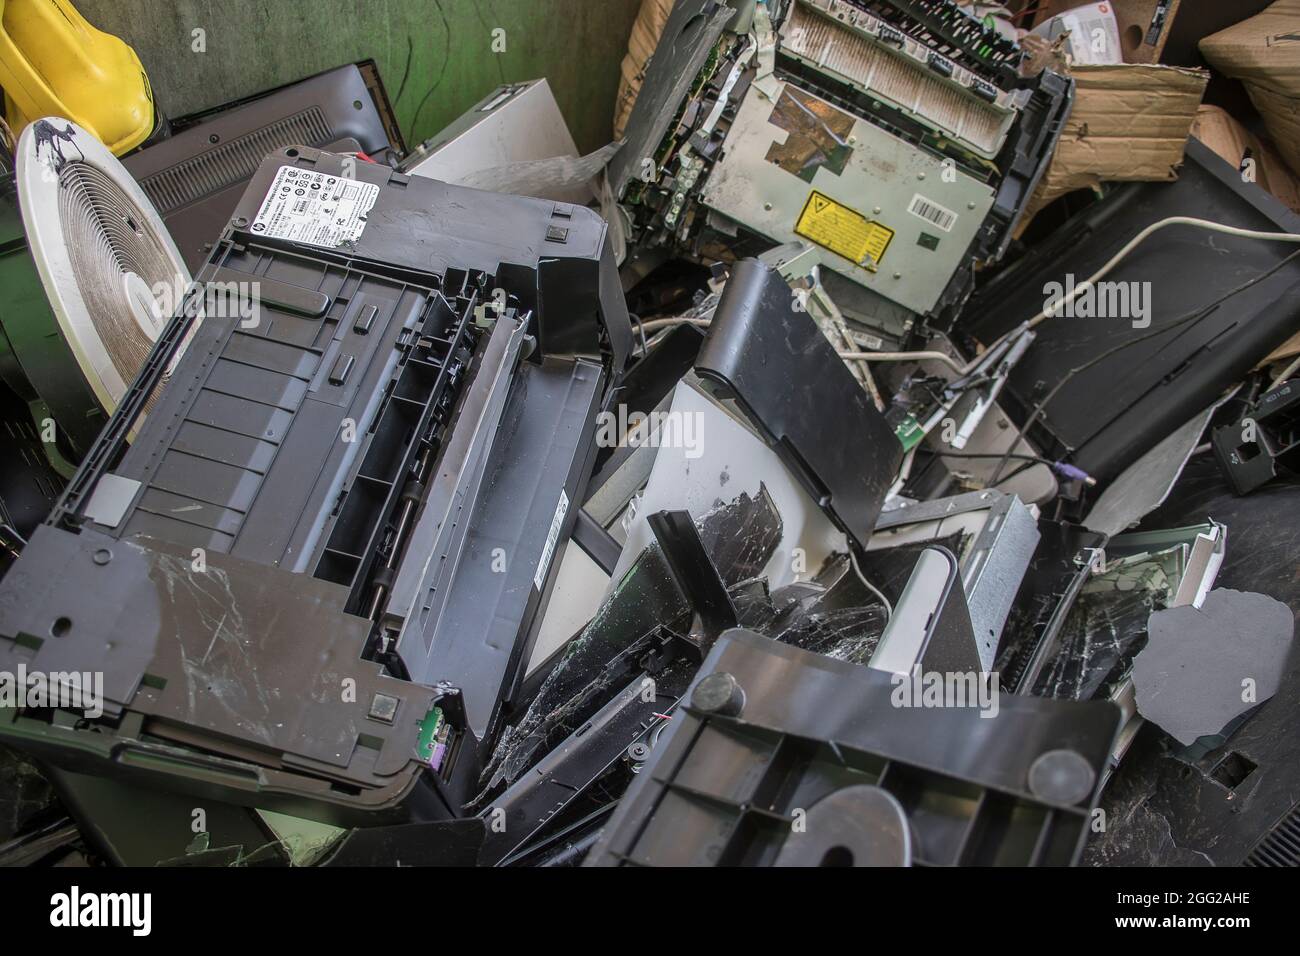 E-waste collected in skip at rural Australian recycling centre. Old computers, screens, and assorted electronic waste. Stock Photo